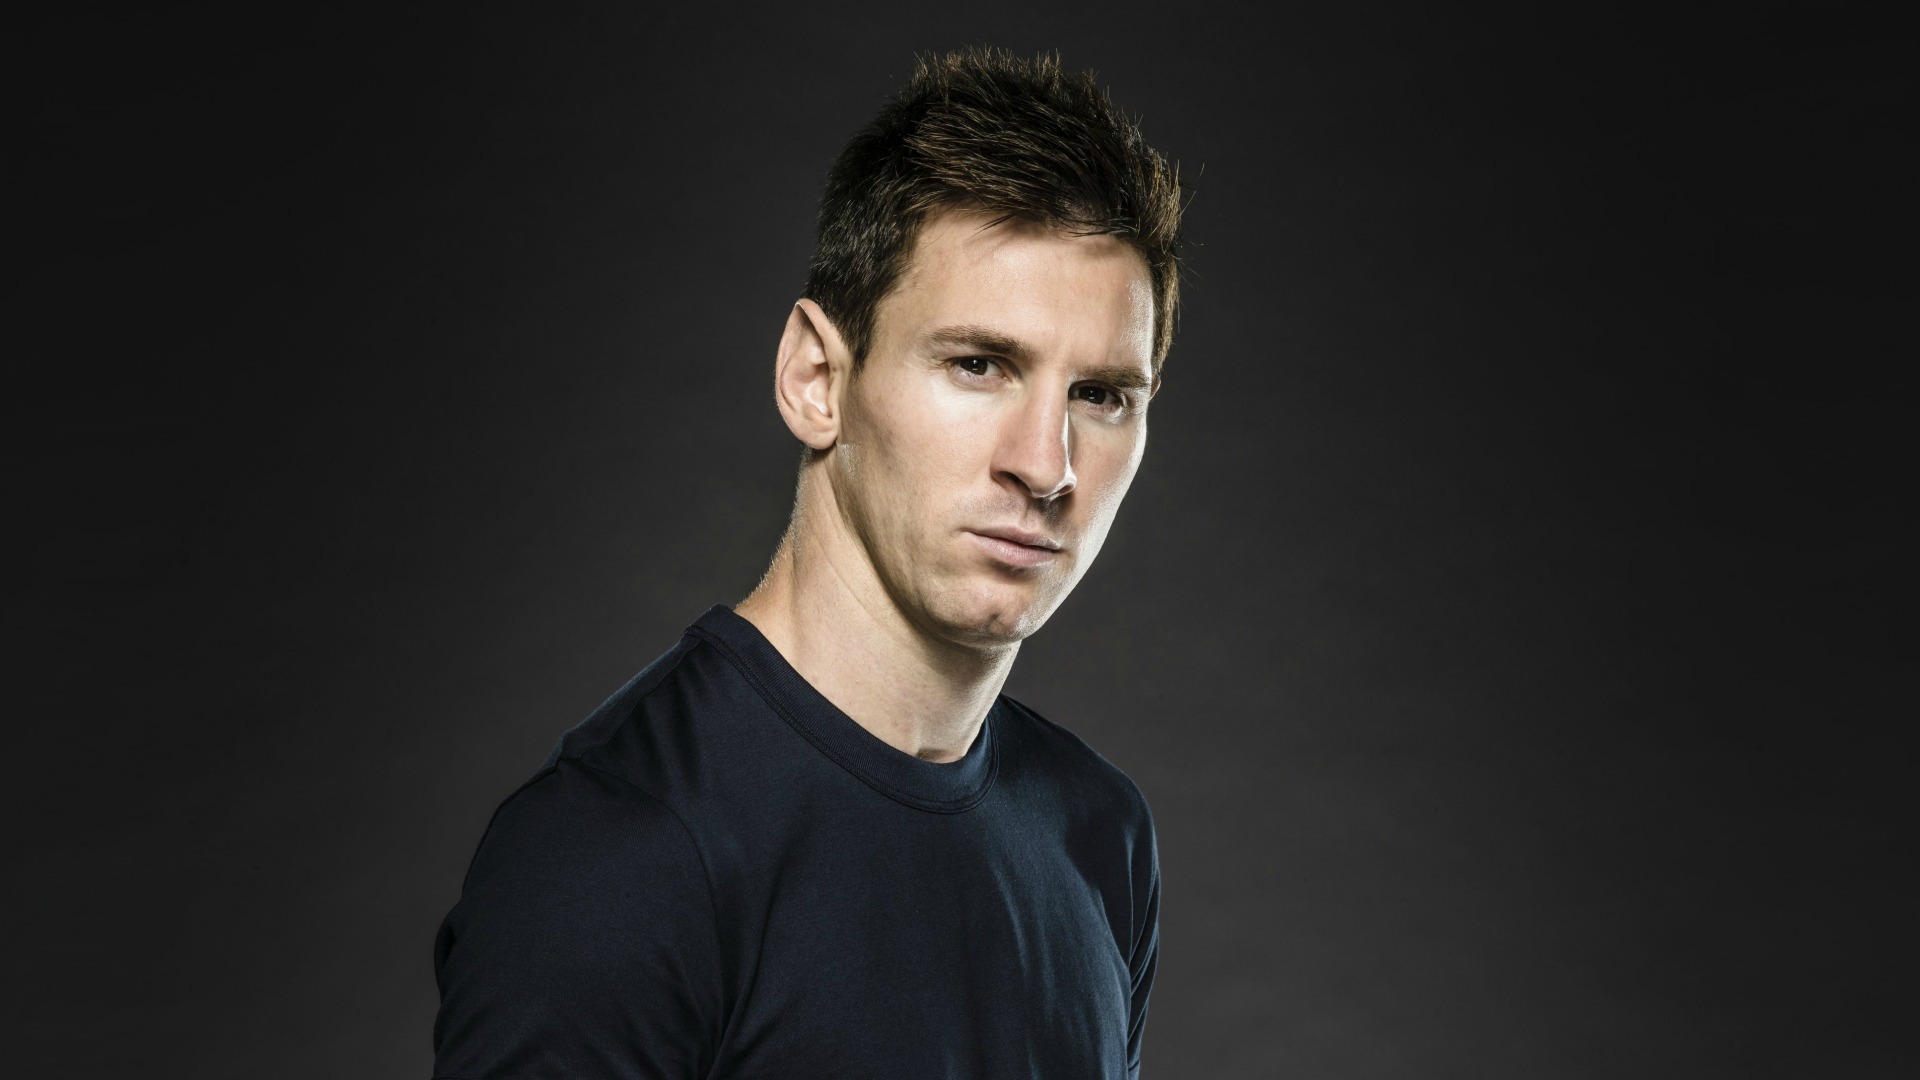 Pictures Of Lionel Messi Hd Wallpapers 1920x1080